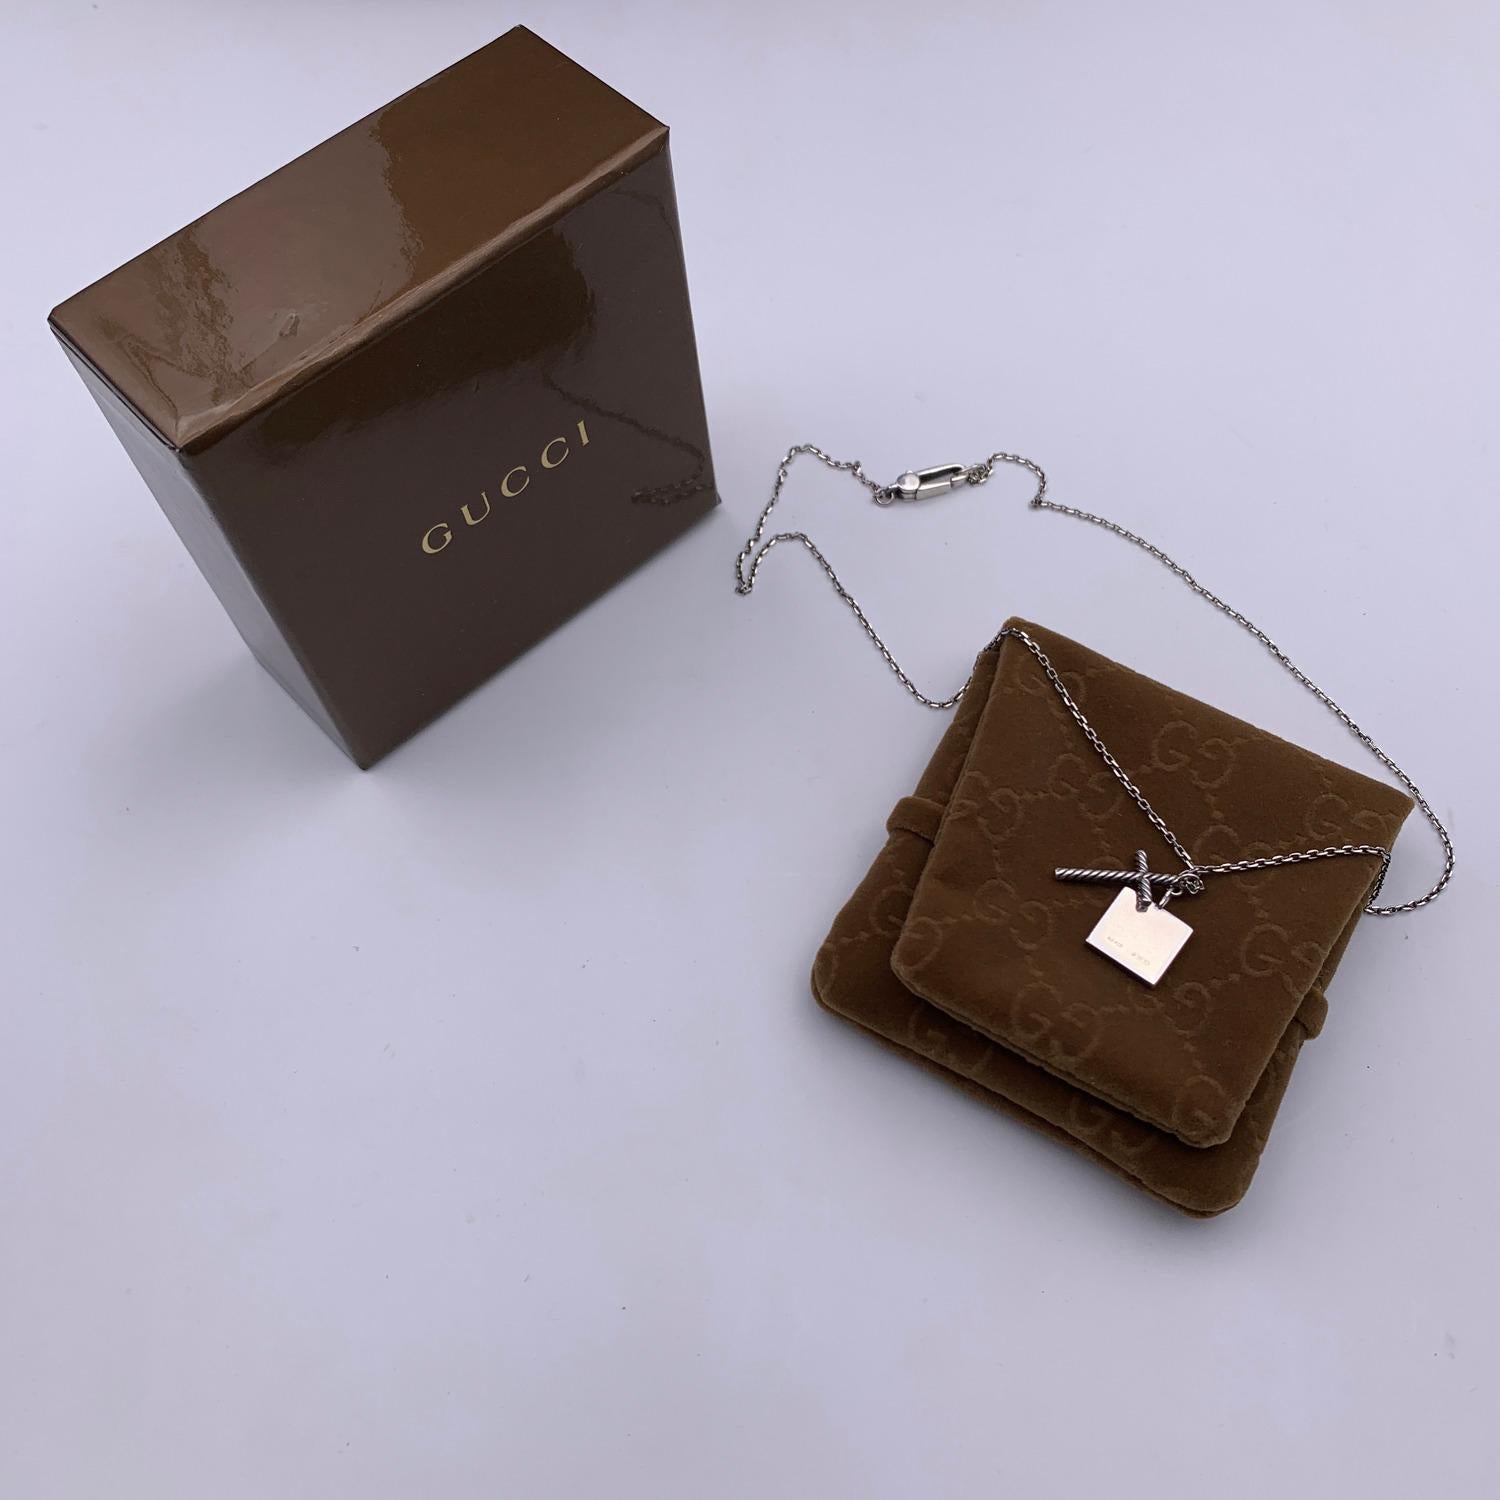 Classic unisex chain necklace by Gucci. Made in sterling silver. Square logo pendant and cross pendant. Lobster closure. Total length of the chain:  18.5 inches - 45.7 cm .'Gucci - made in Italy' engraved on the pendant. 'Ag925' hallmark engraved on